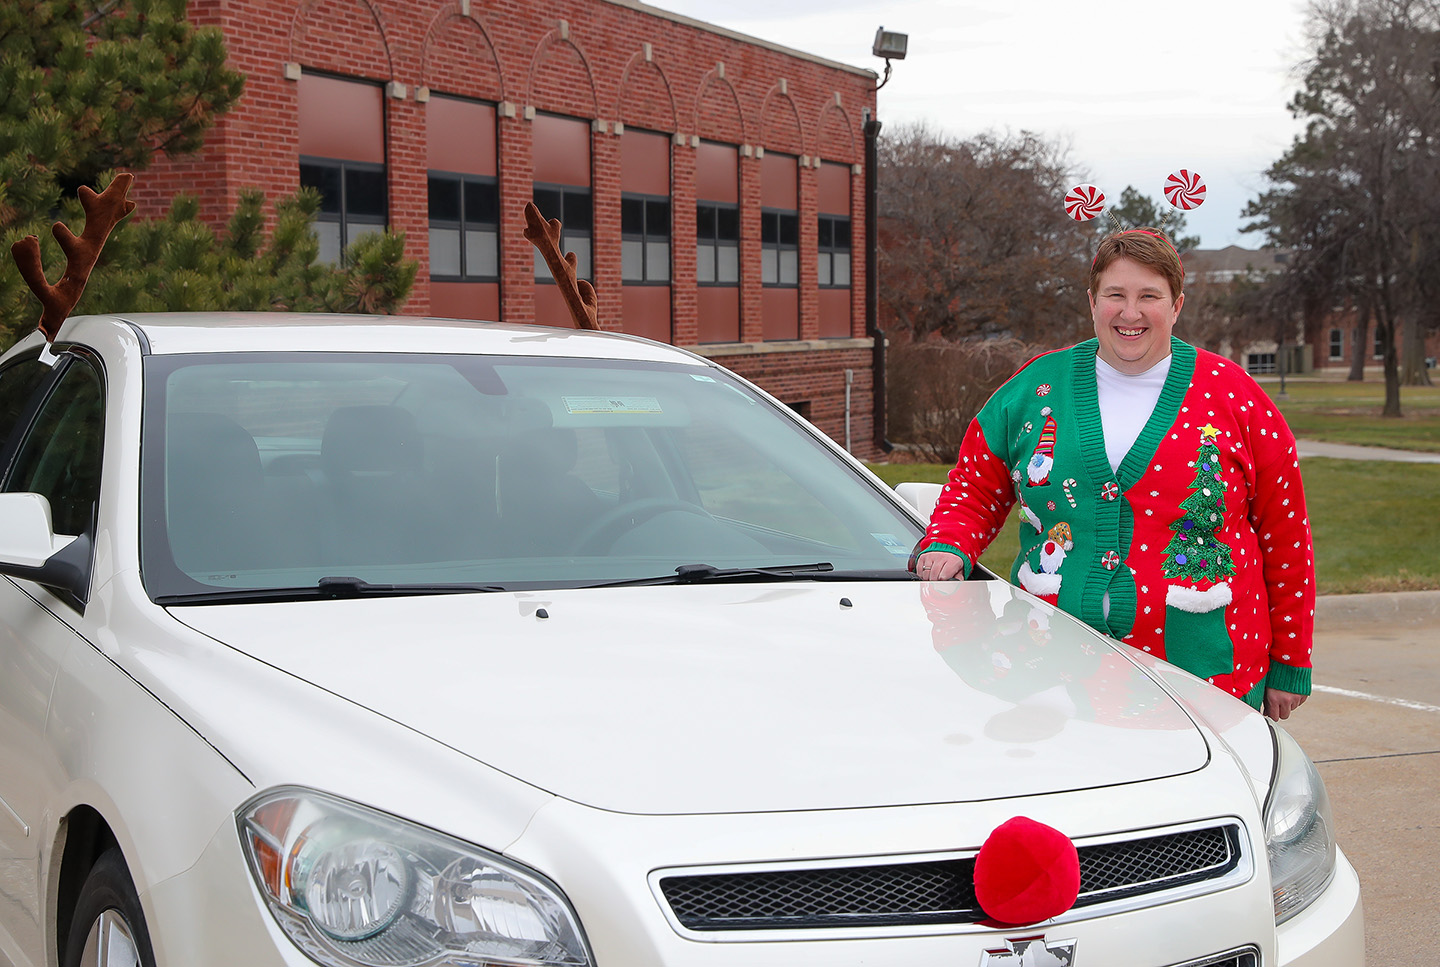 Heather Rhinehart even dresses her car up for the holidays.